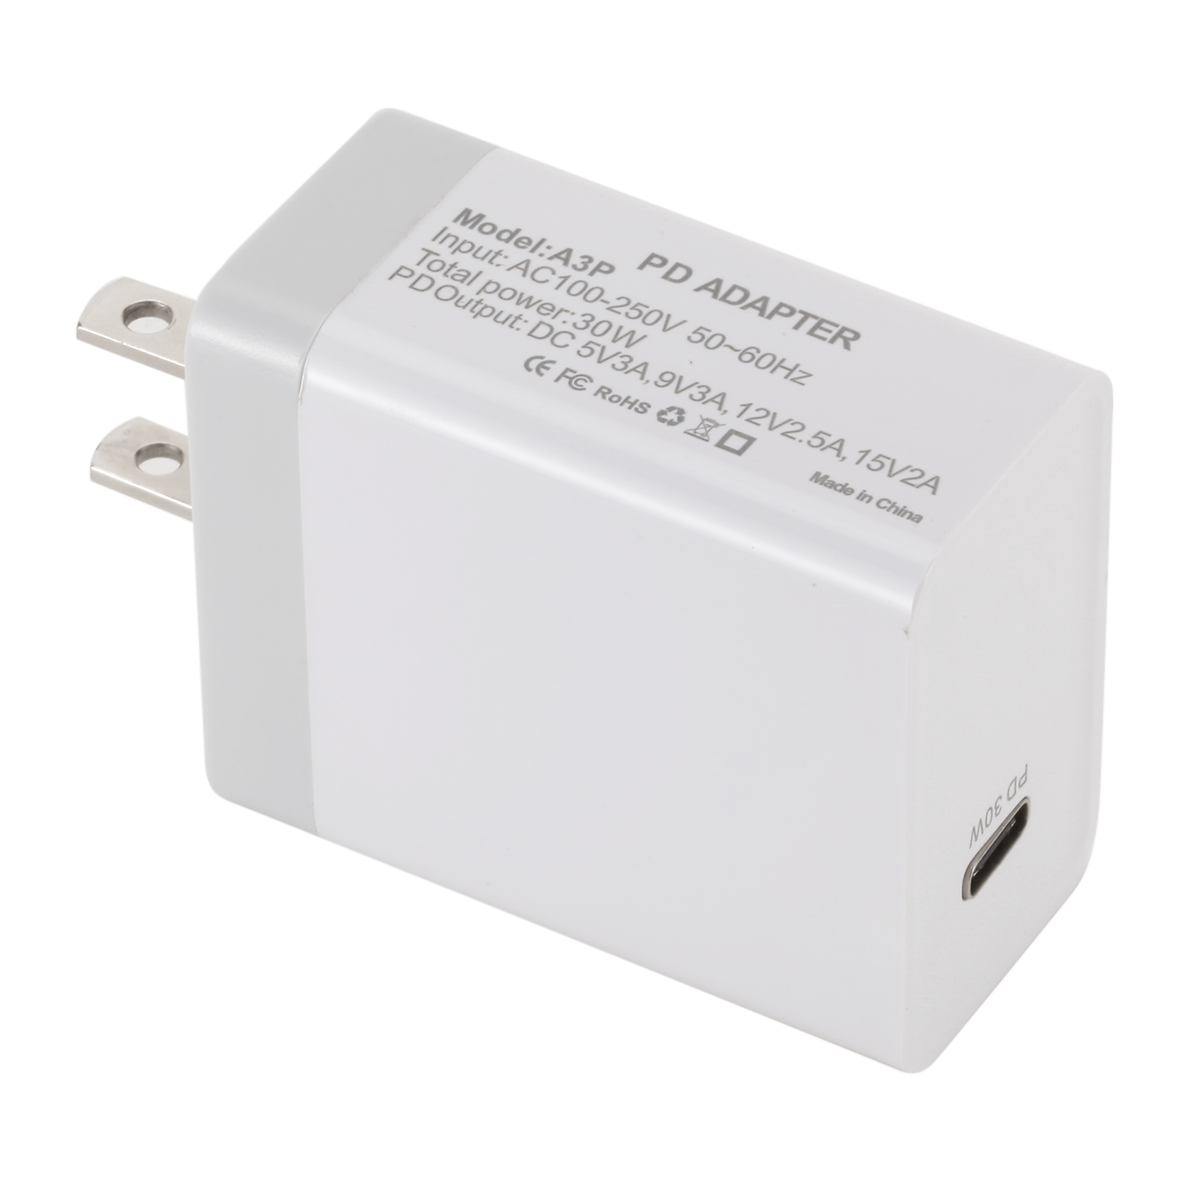 A3P-PD-Fast-Charge-Protocol-Charger-30W-Adapter-TYPE-C-Travel-Charger-AC100-250V-1797295-5